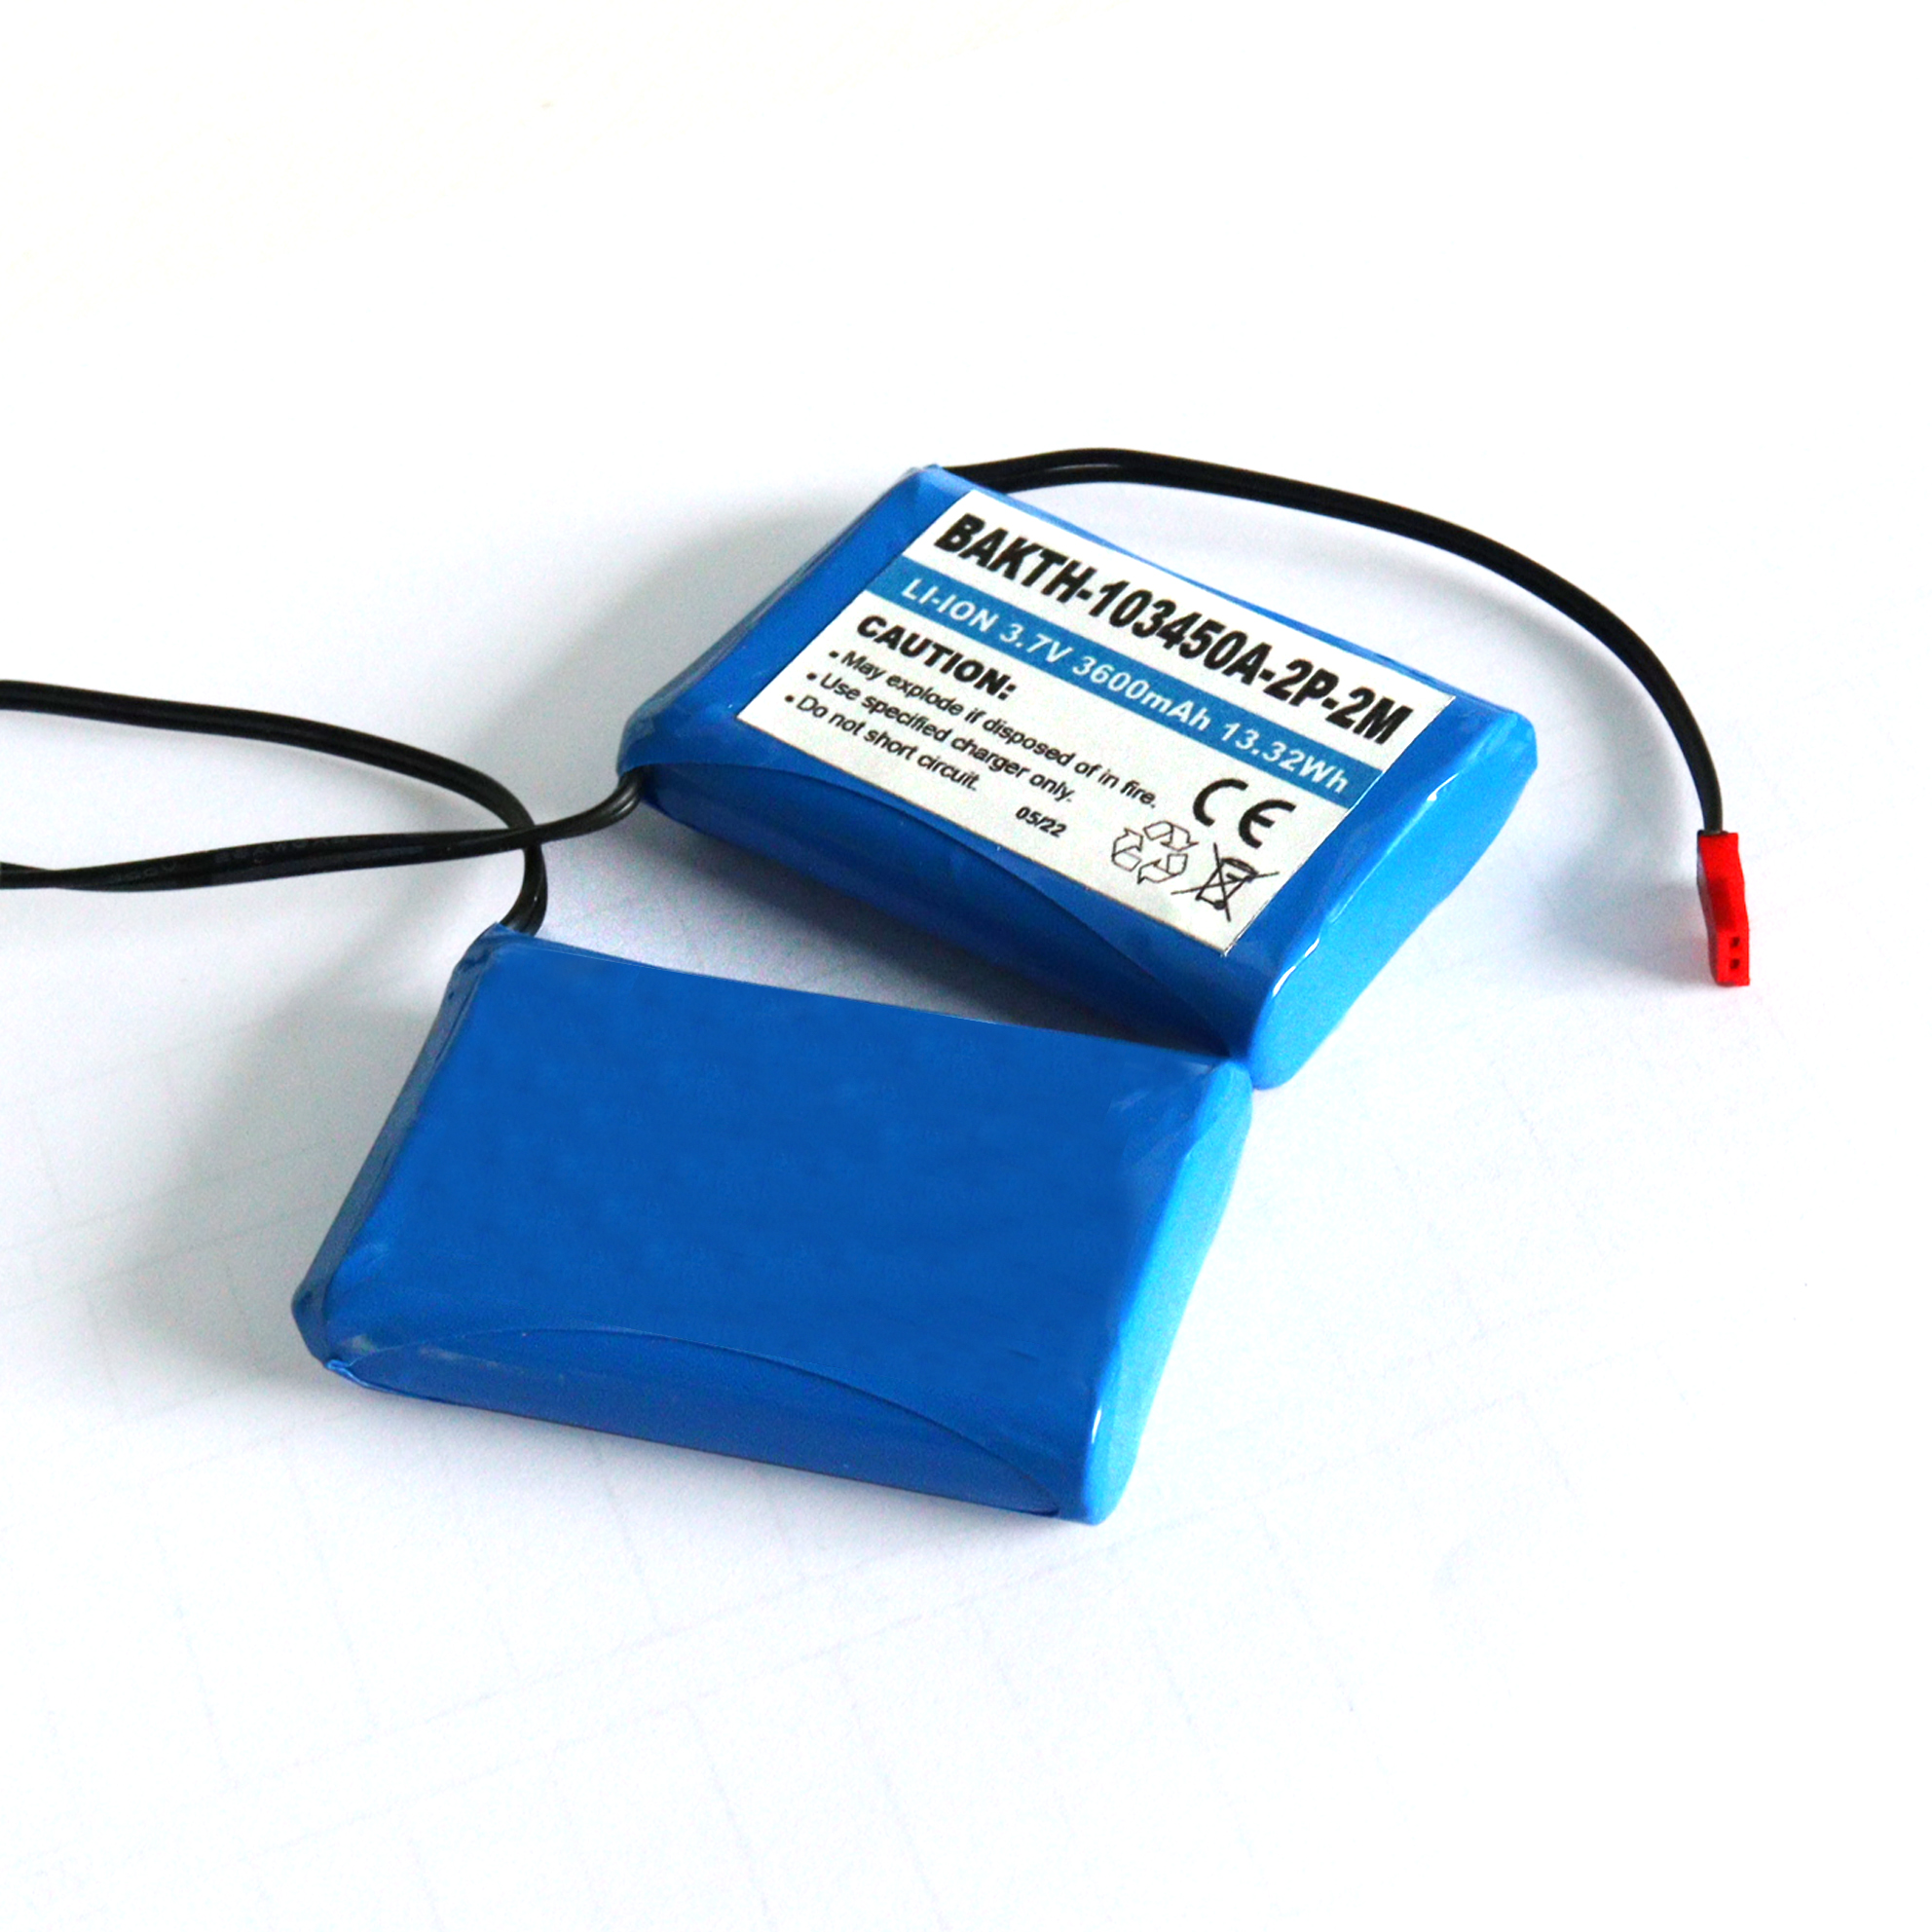 Hot Sale Rechargeable Li Ion Battery Pack 103450 2P 3.7V 3600mAh for Electric Appliance